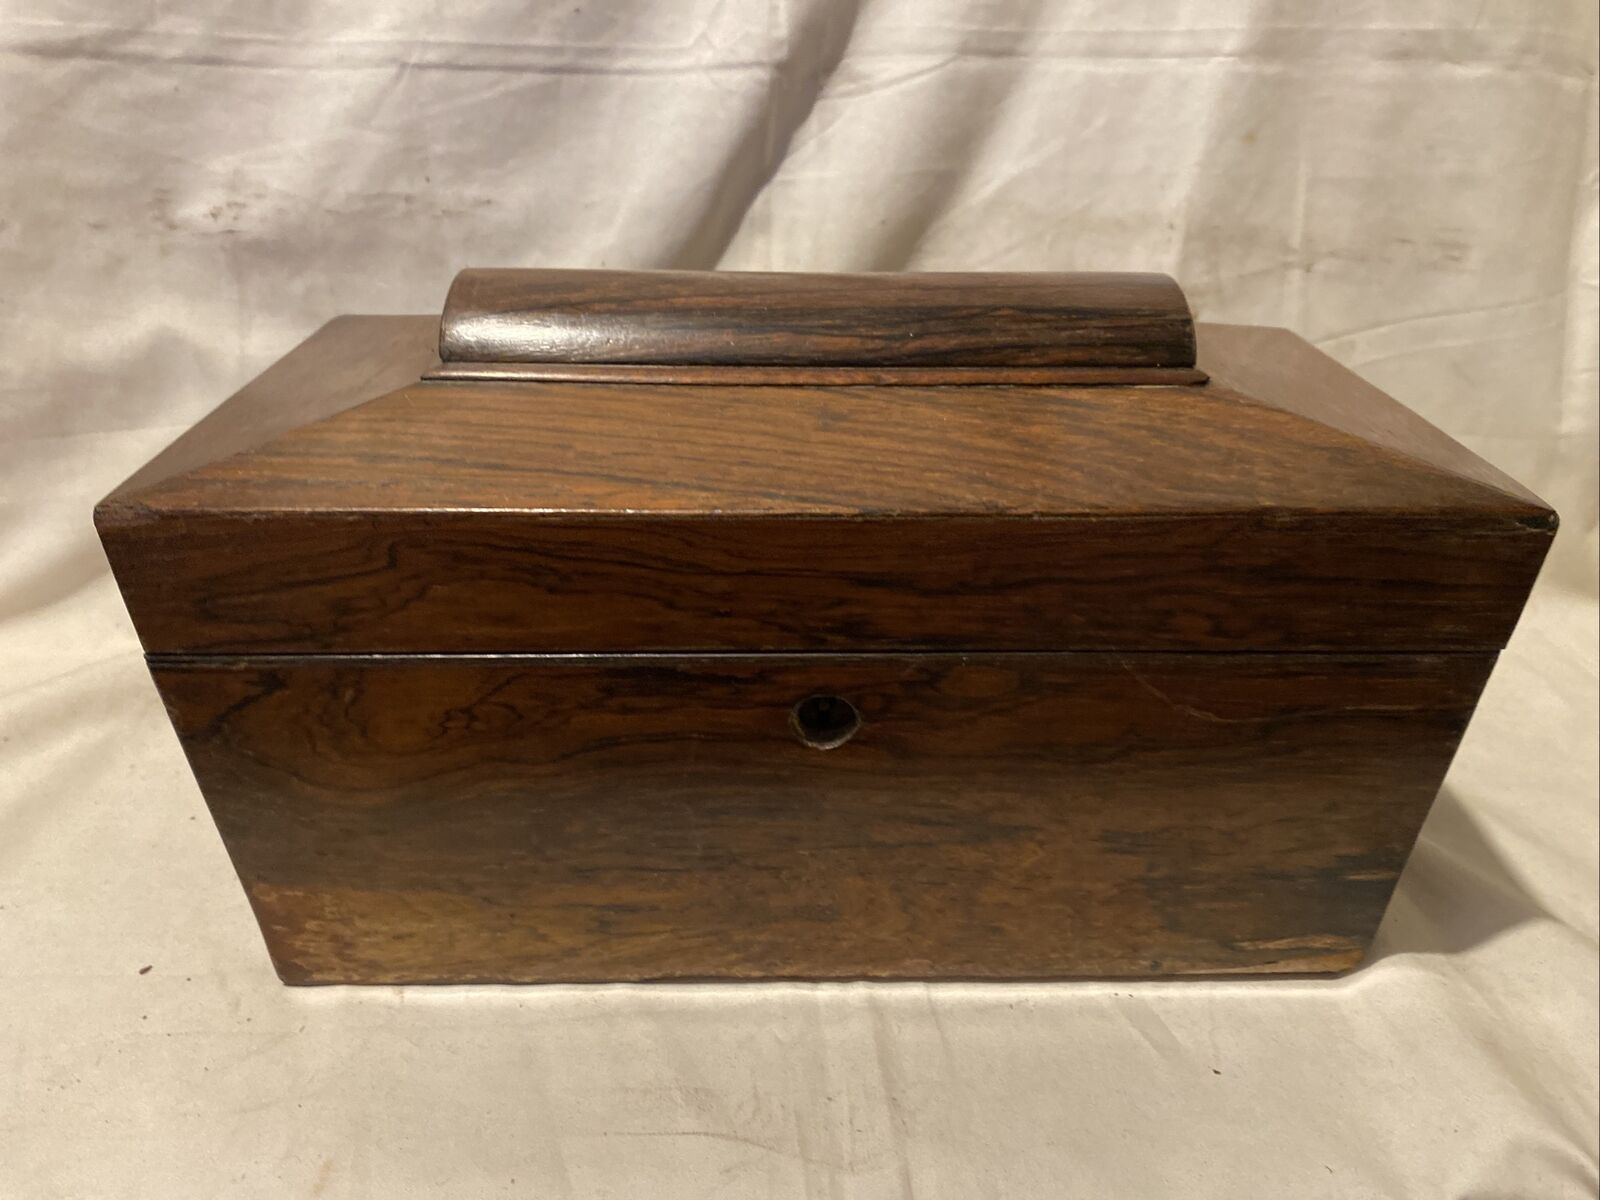 Antique Valuations: Vintage Antique Rosewood Tea Caddy 2 Compartments And Lids